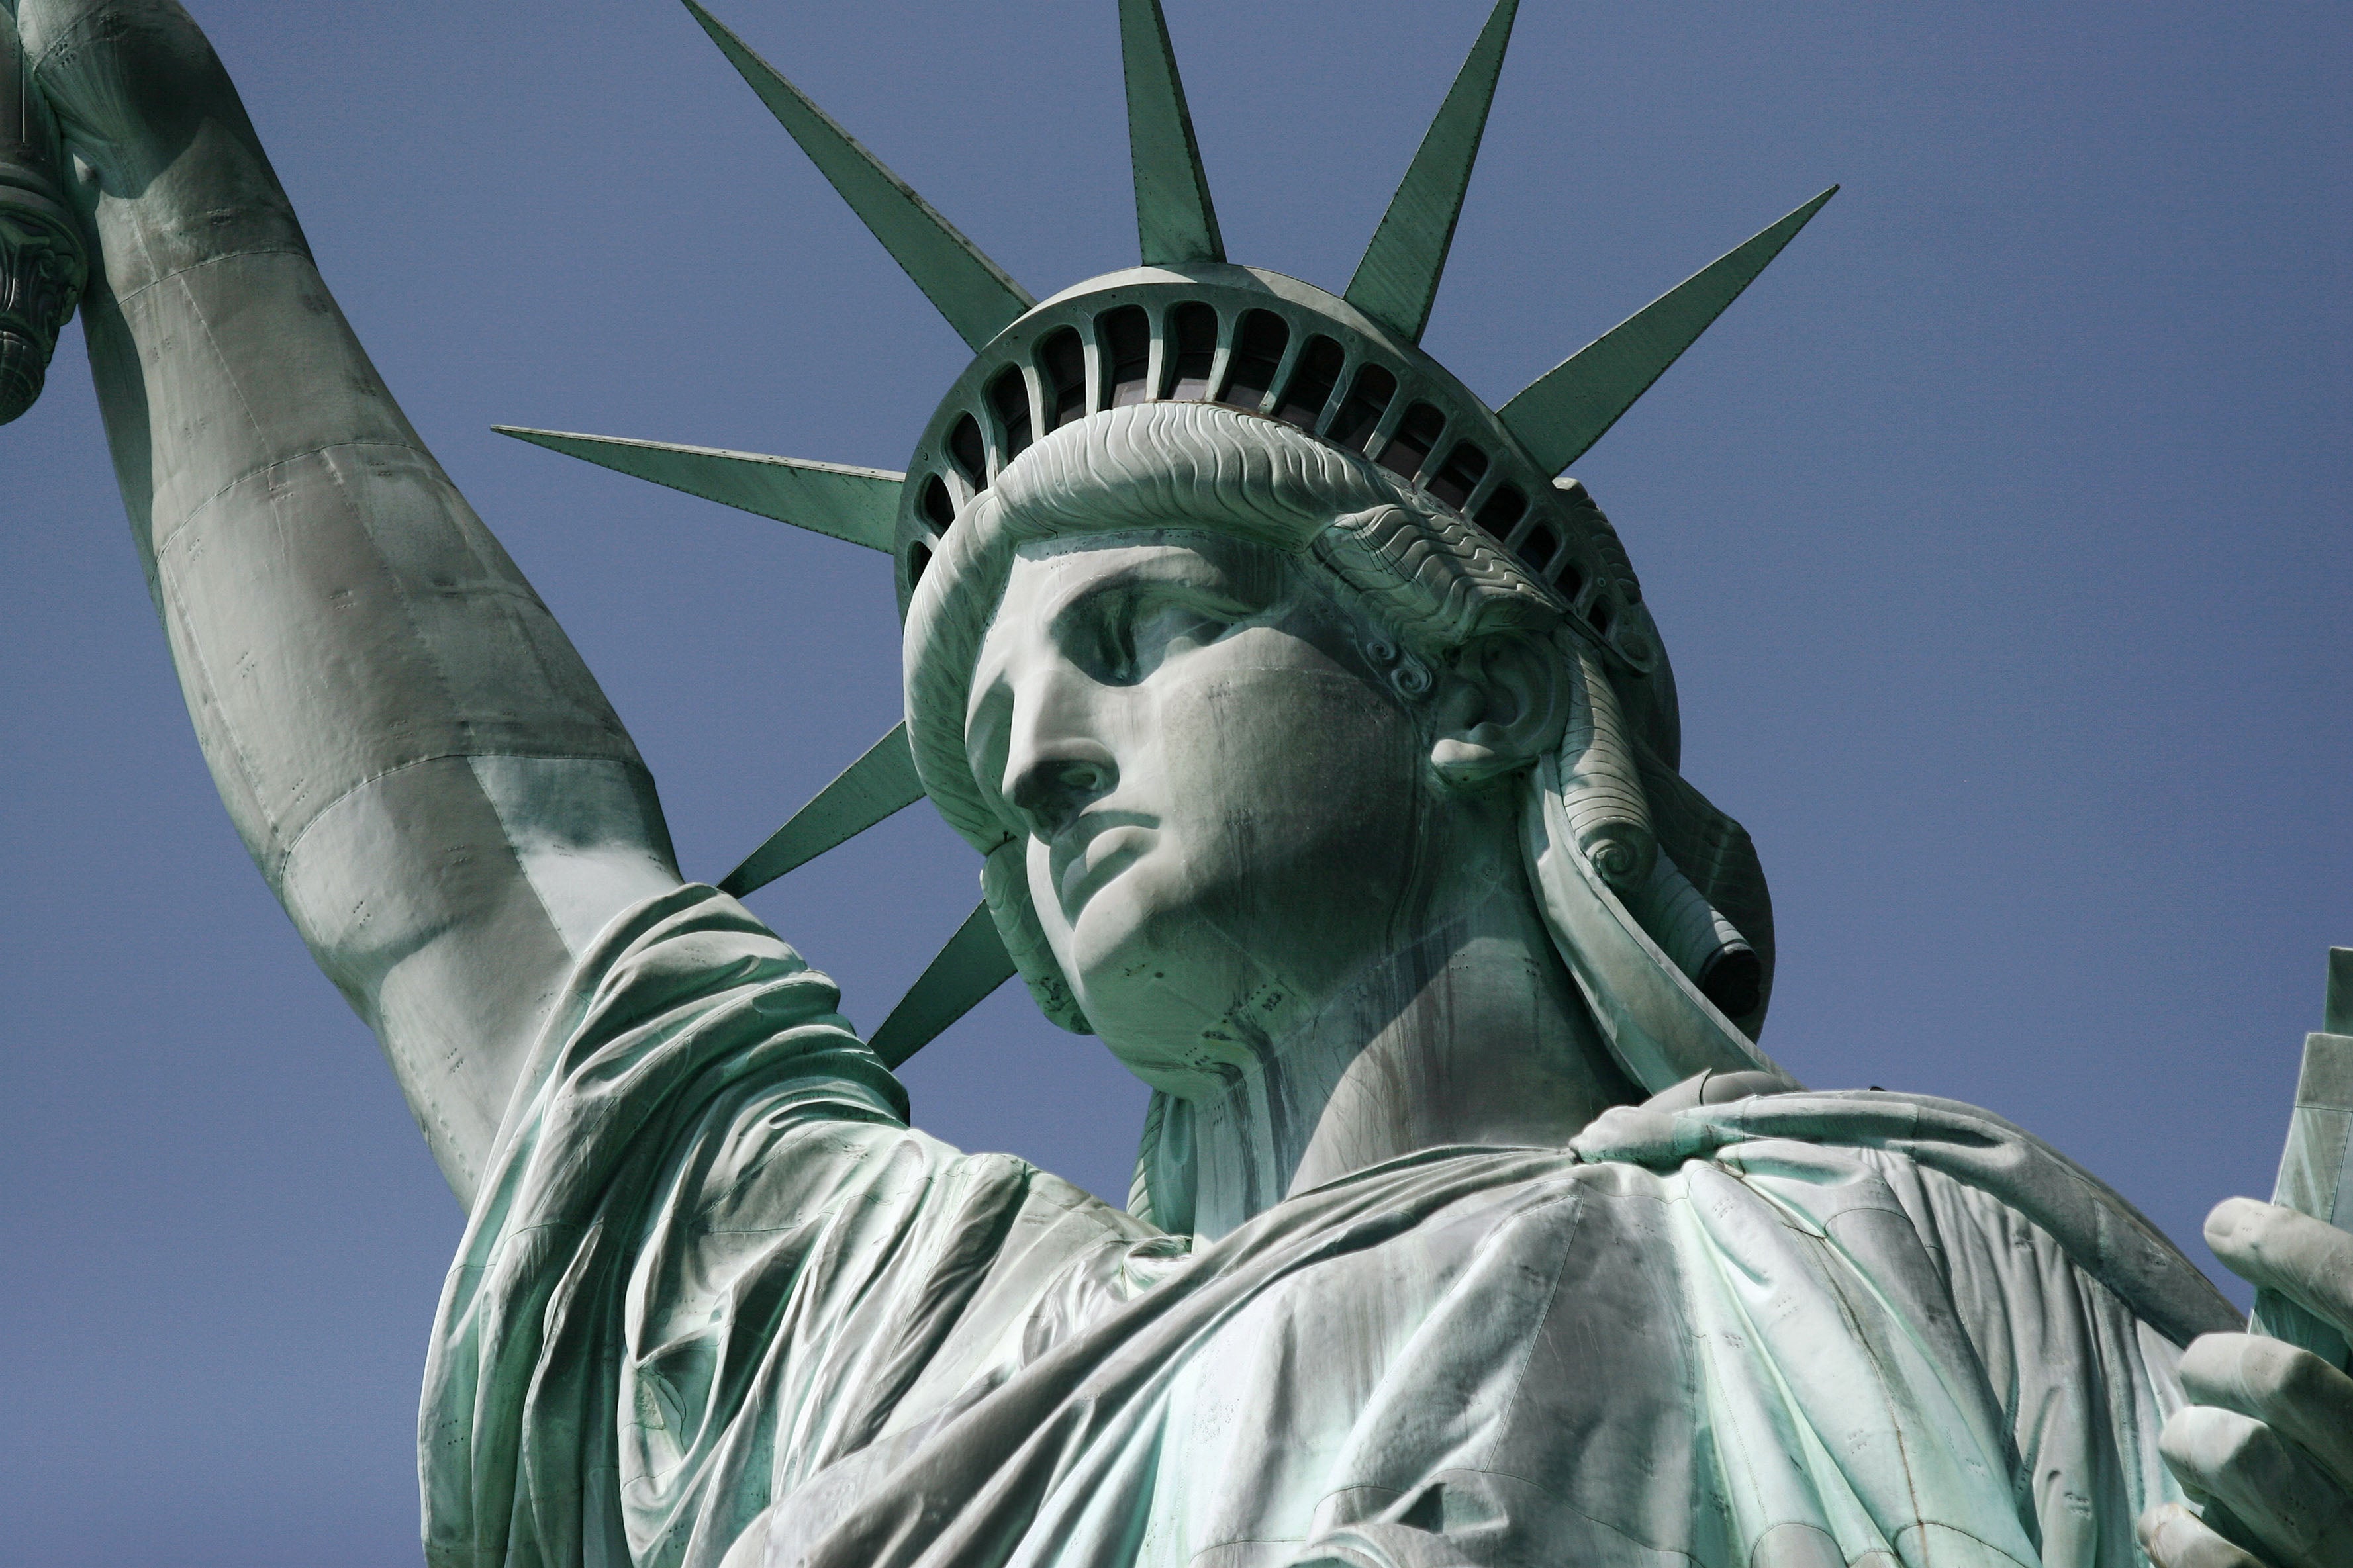 The Statue of Liberty was a gift from France in the late 19th century